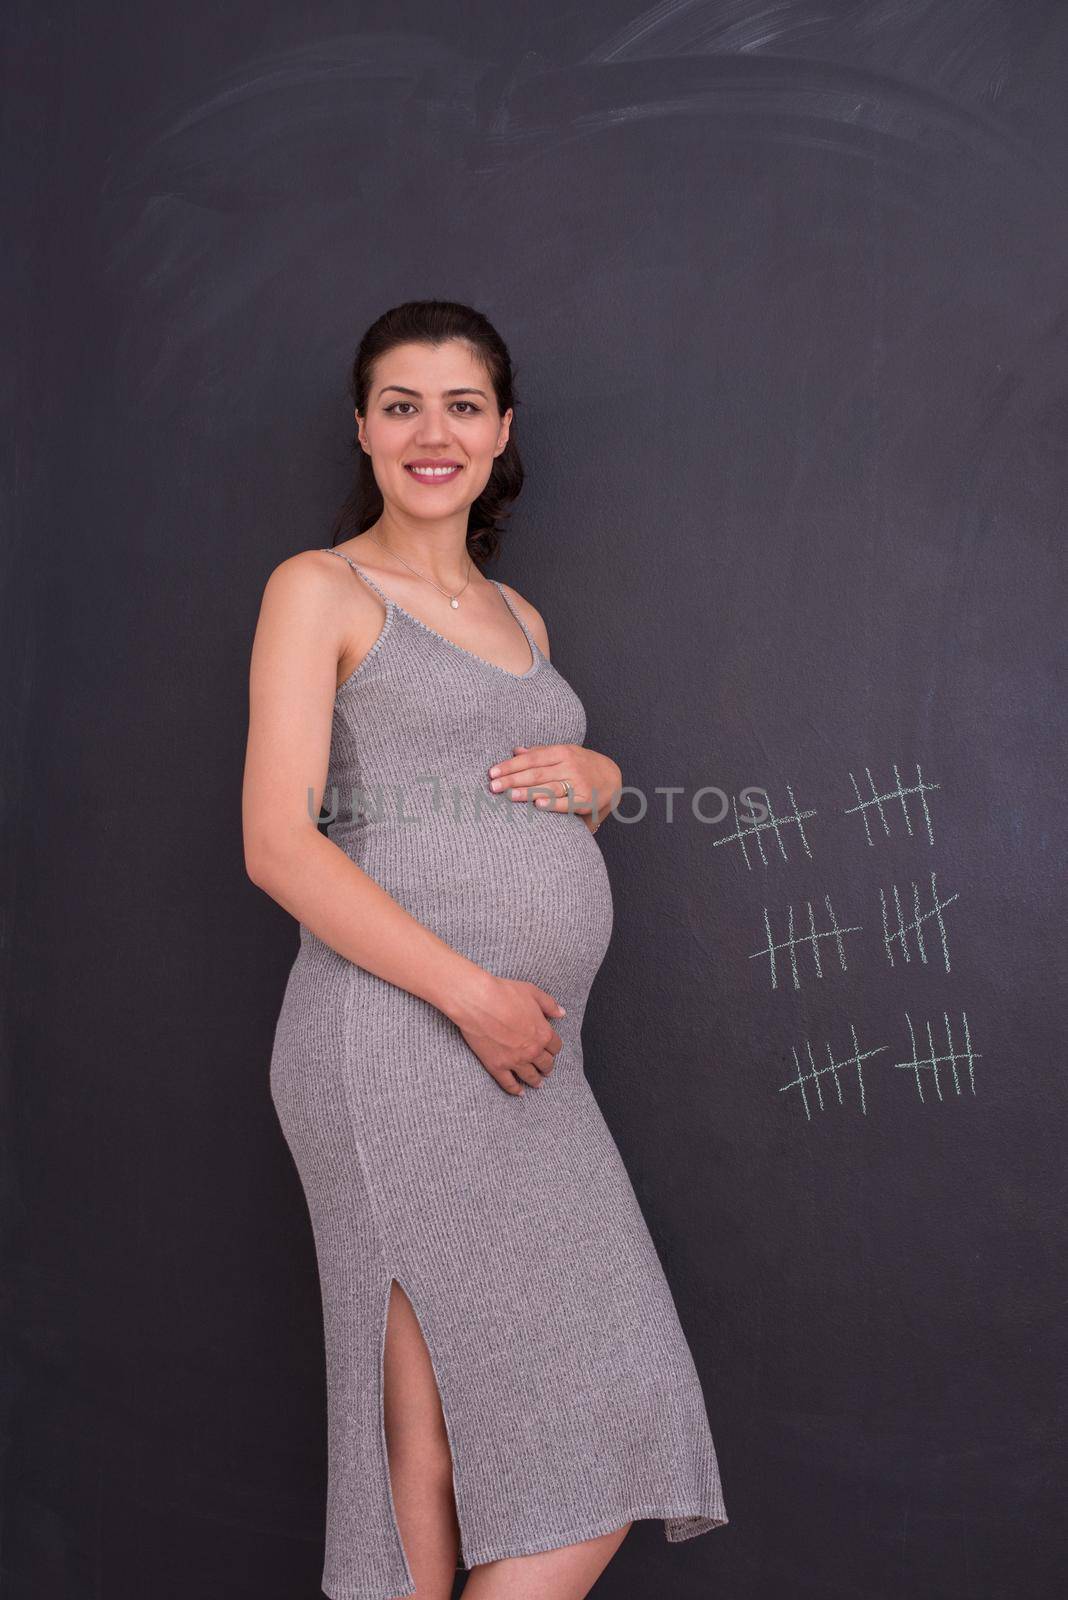 Portrait of happy pregnant woman with hands on belly in front of black chalkboard